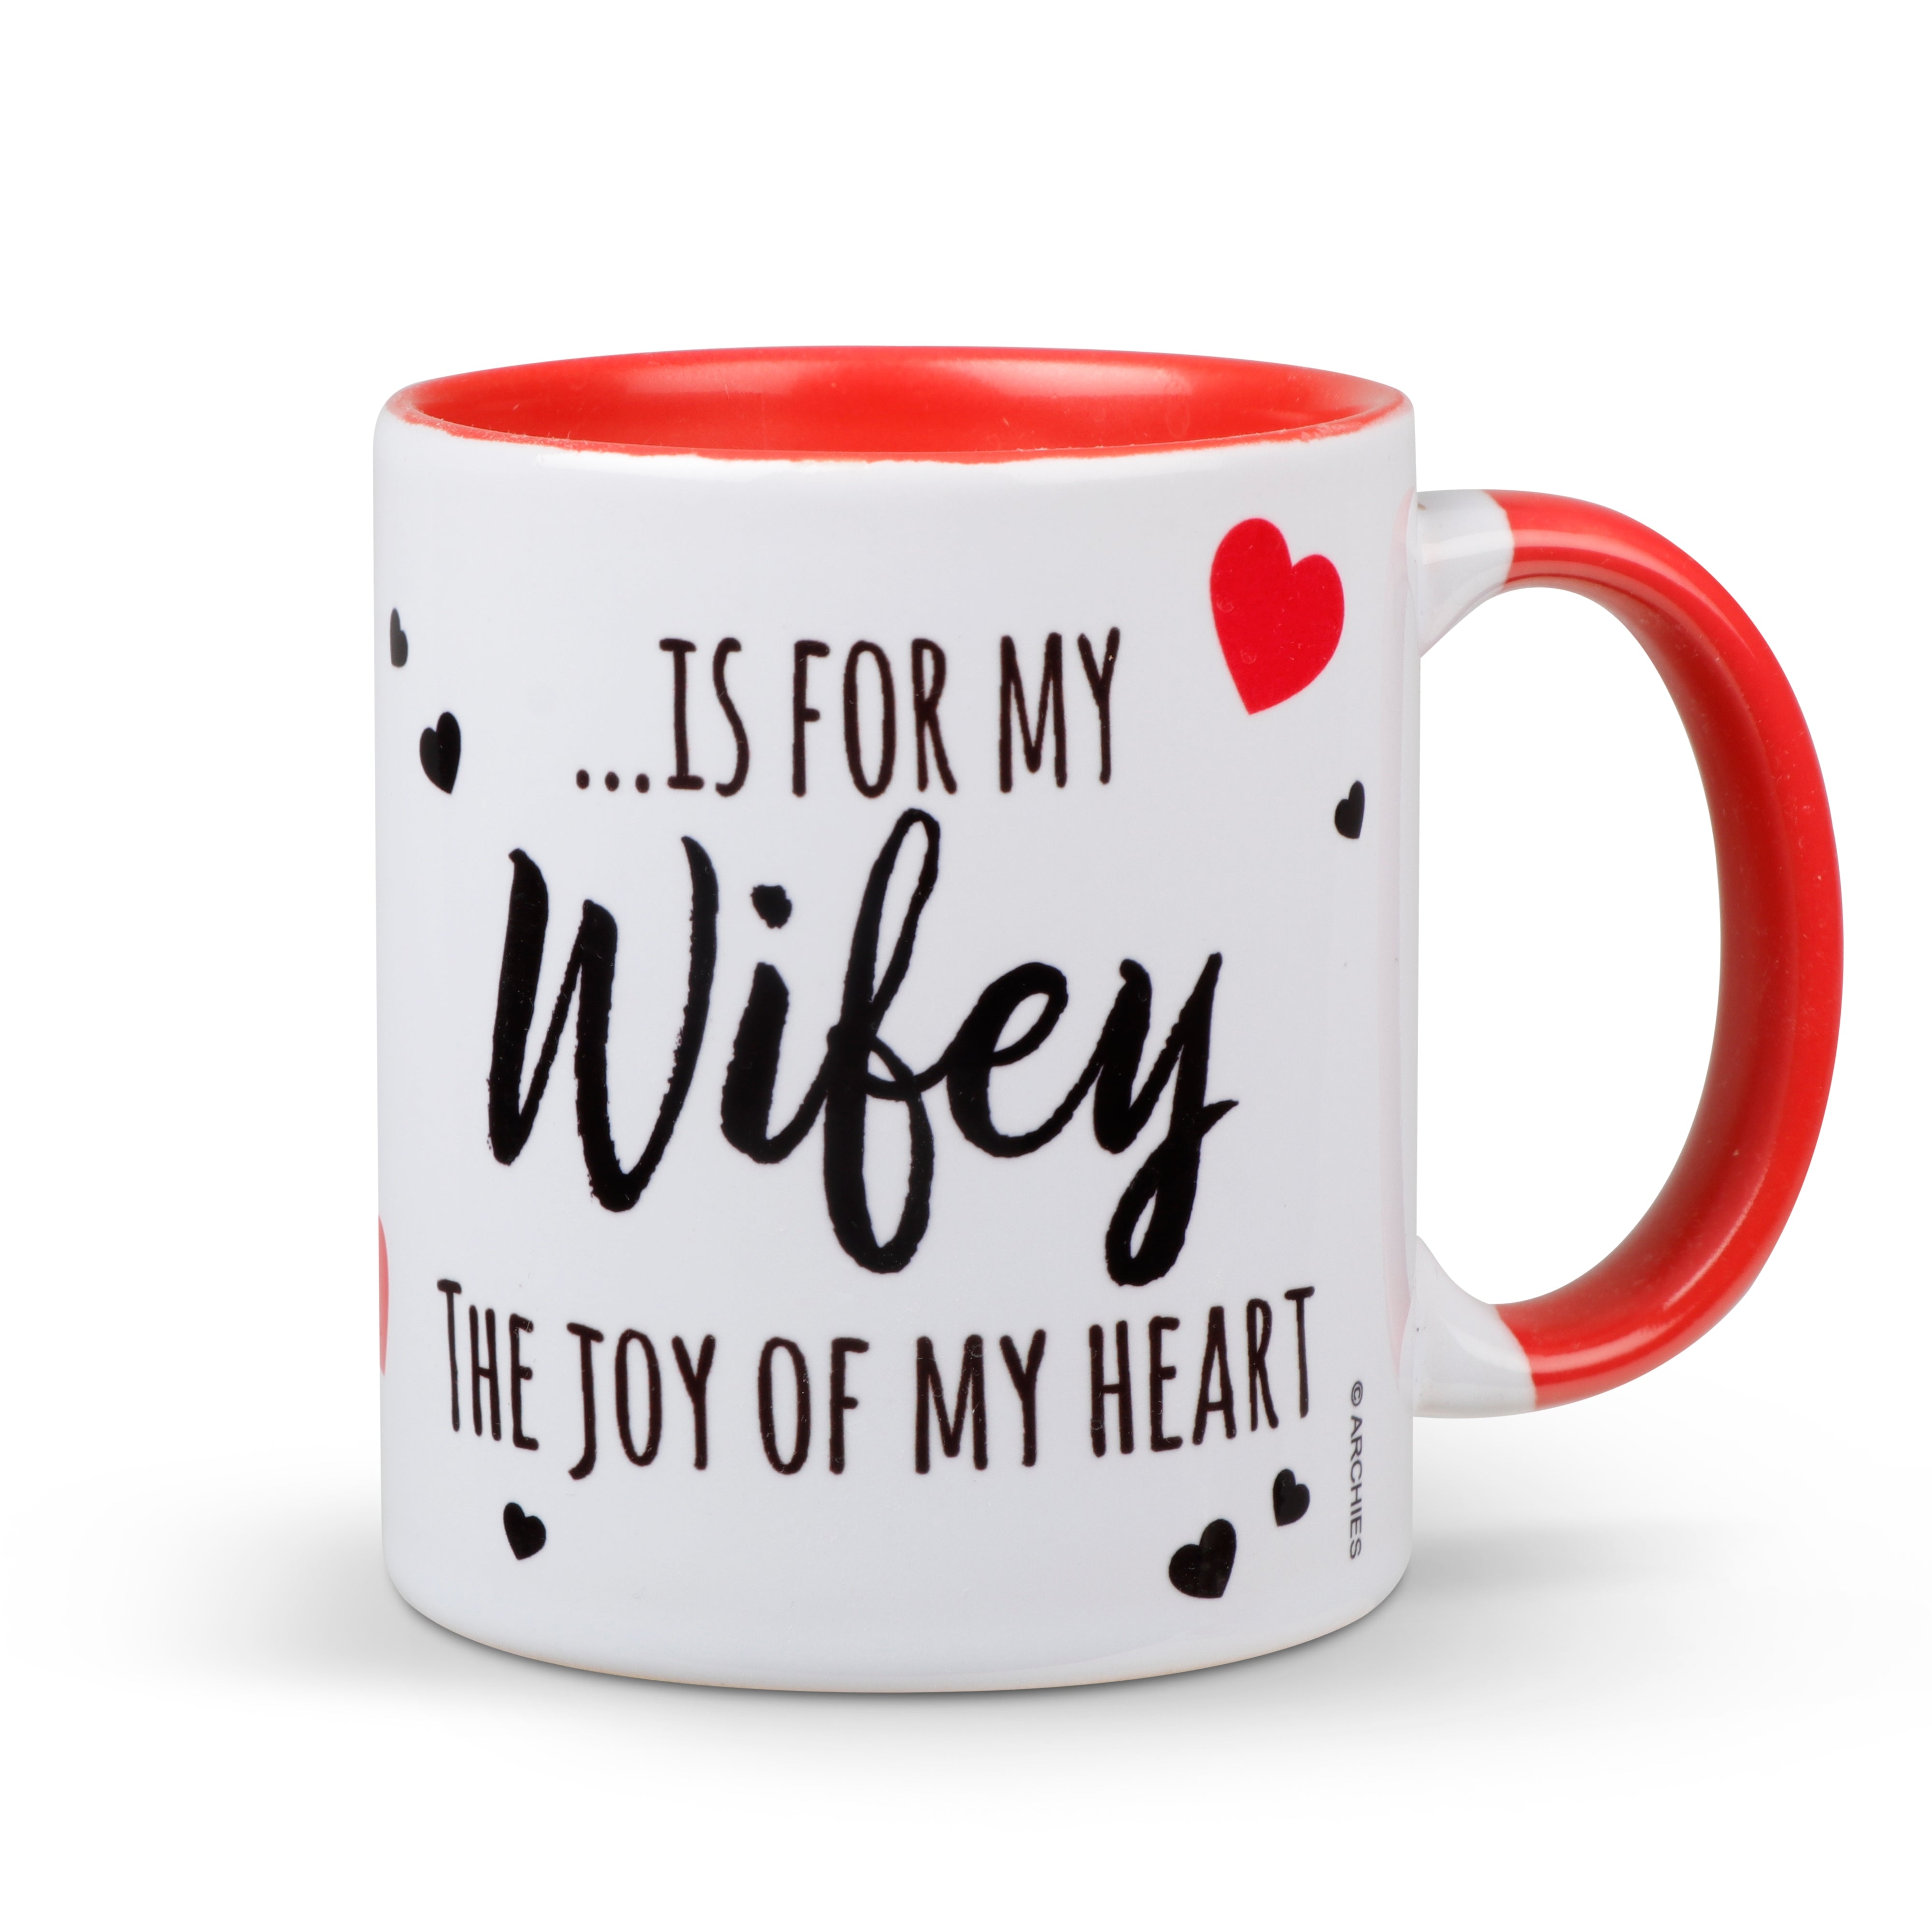 Archies | Archies KEEP SAKE Wife Gift Combo with Ceramic Mug and Elevated Initial Quotation - with a FREE GREETING CARD 6